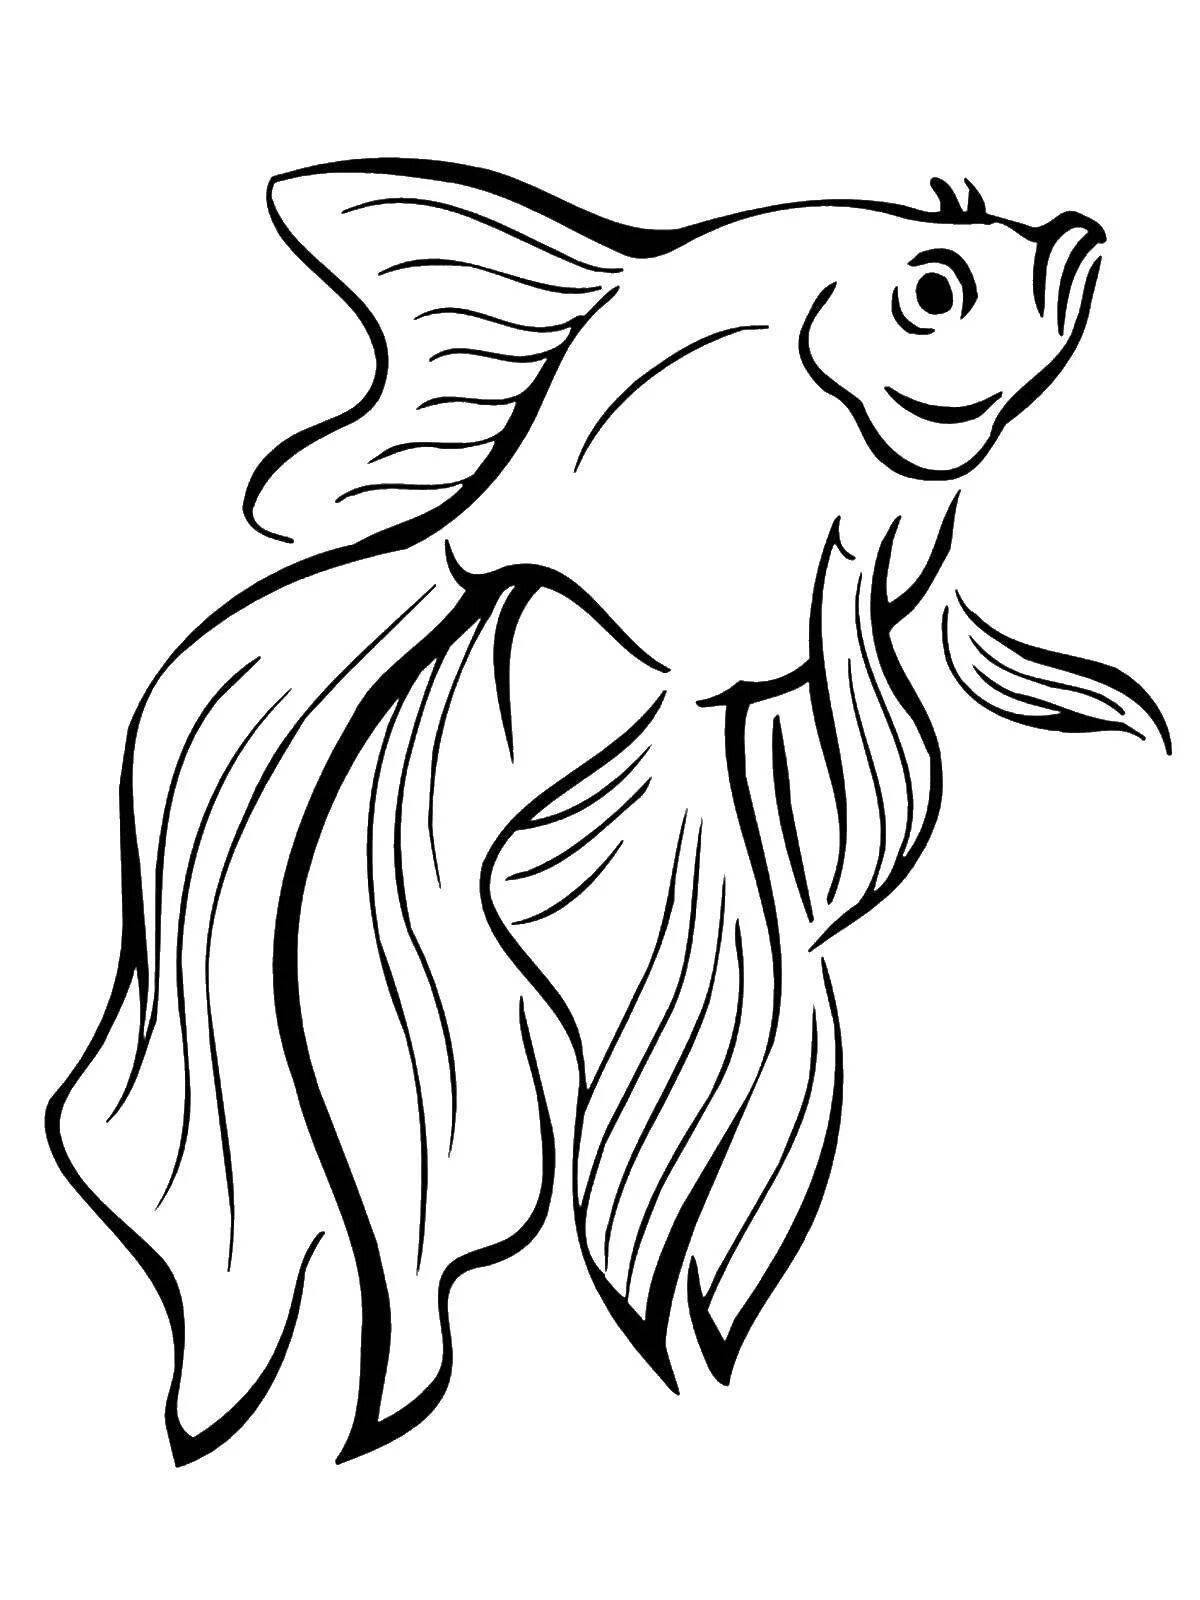 Tempting drawing of a goldfish